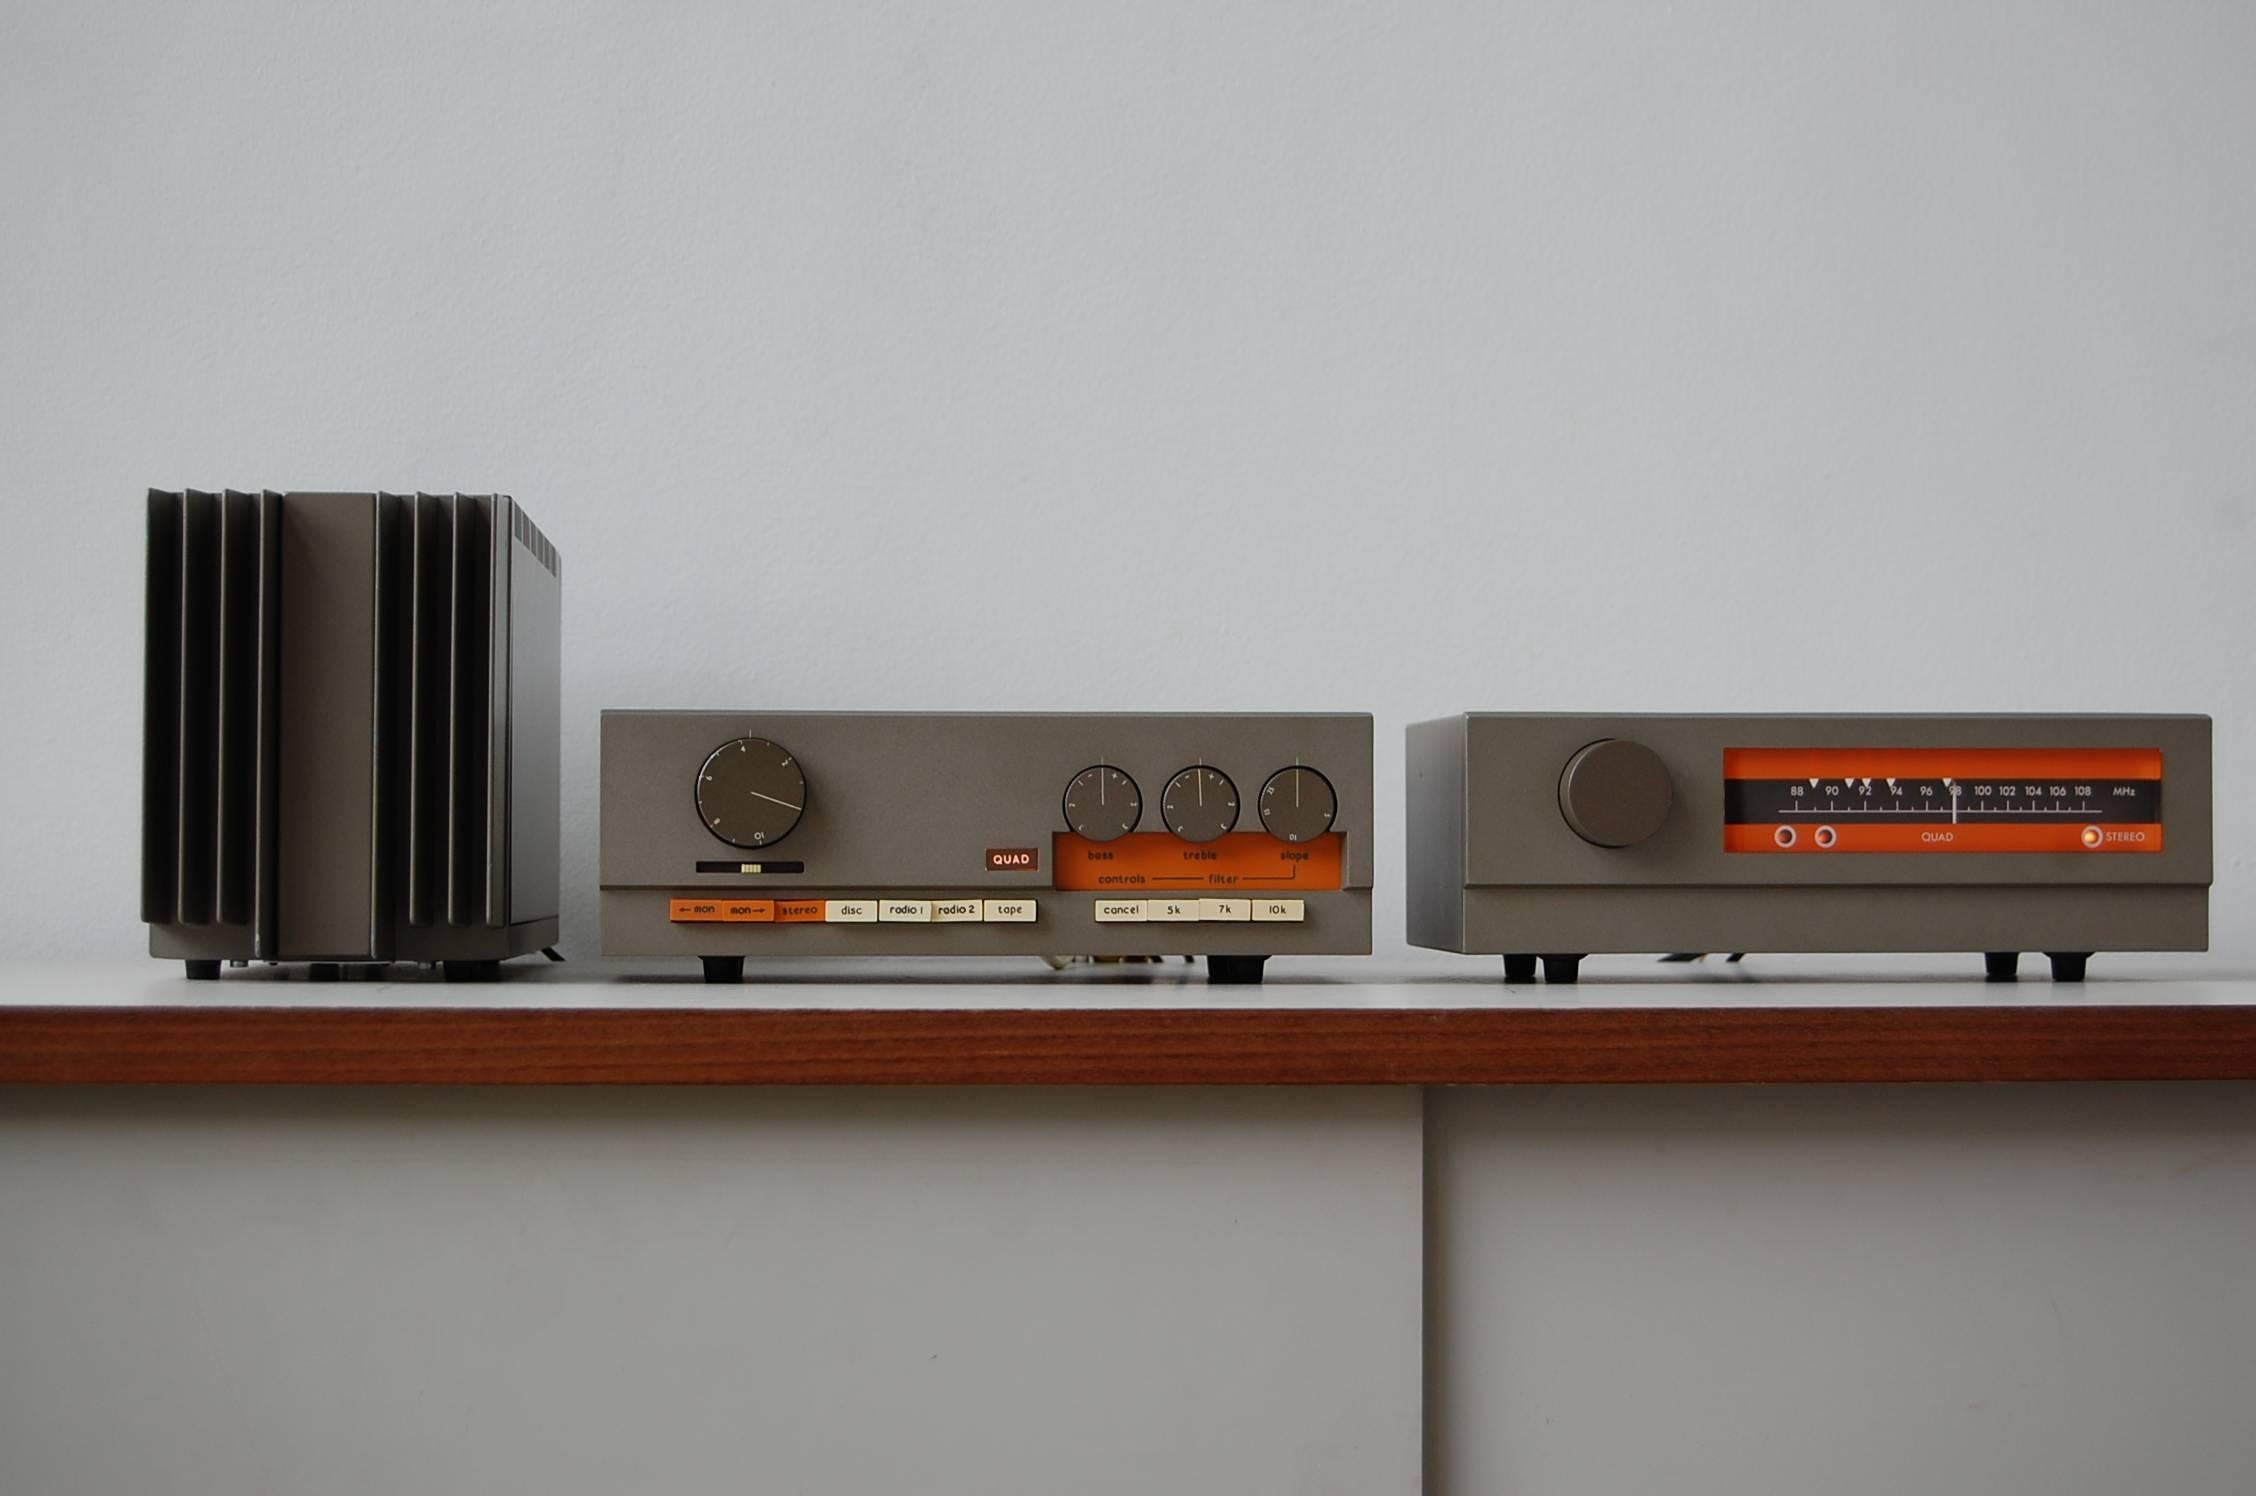 Quad Manufacturing Co Ltd, Huntingdon, UK

Quad 33 / 303 / FM3, 1967
Control unit, power amplifier, FM tuner,

A near-perfect example of a classic late 60’s design.

The 33/303 were the first transistorised amplifier system components